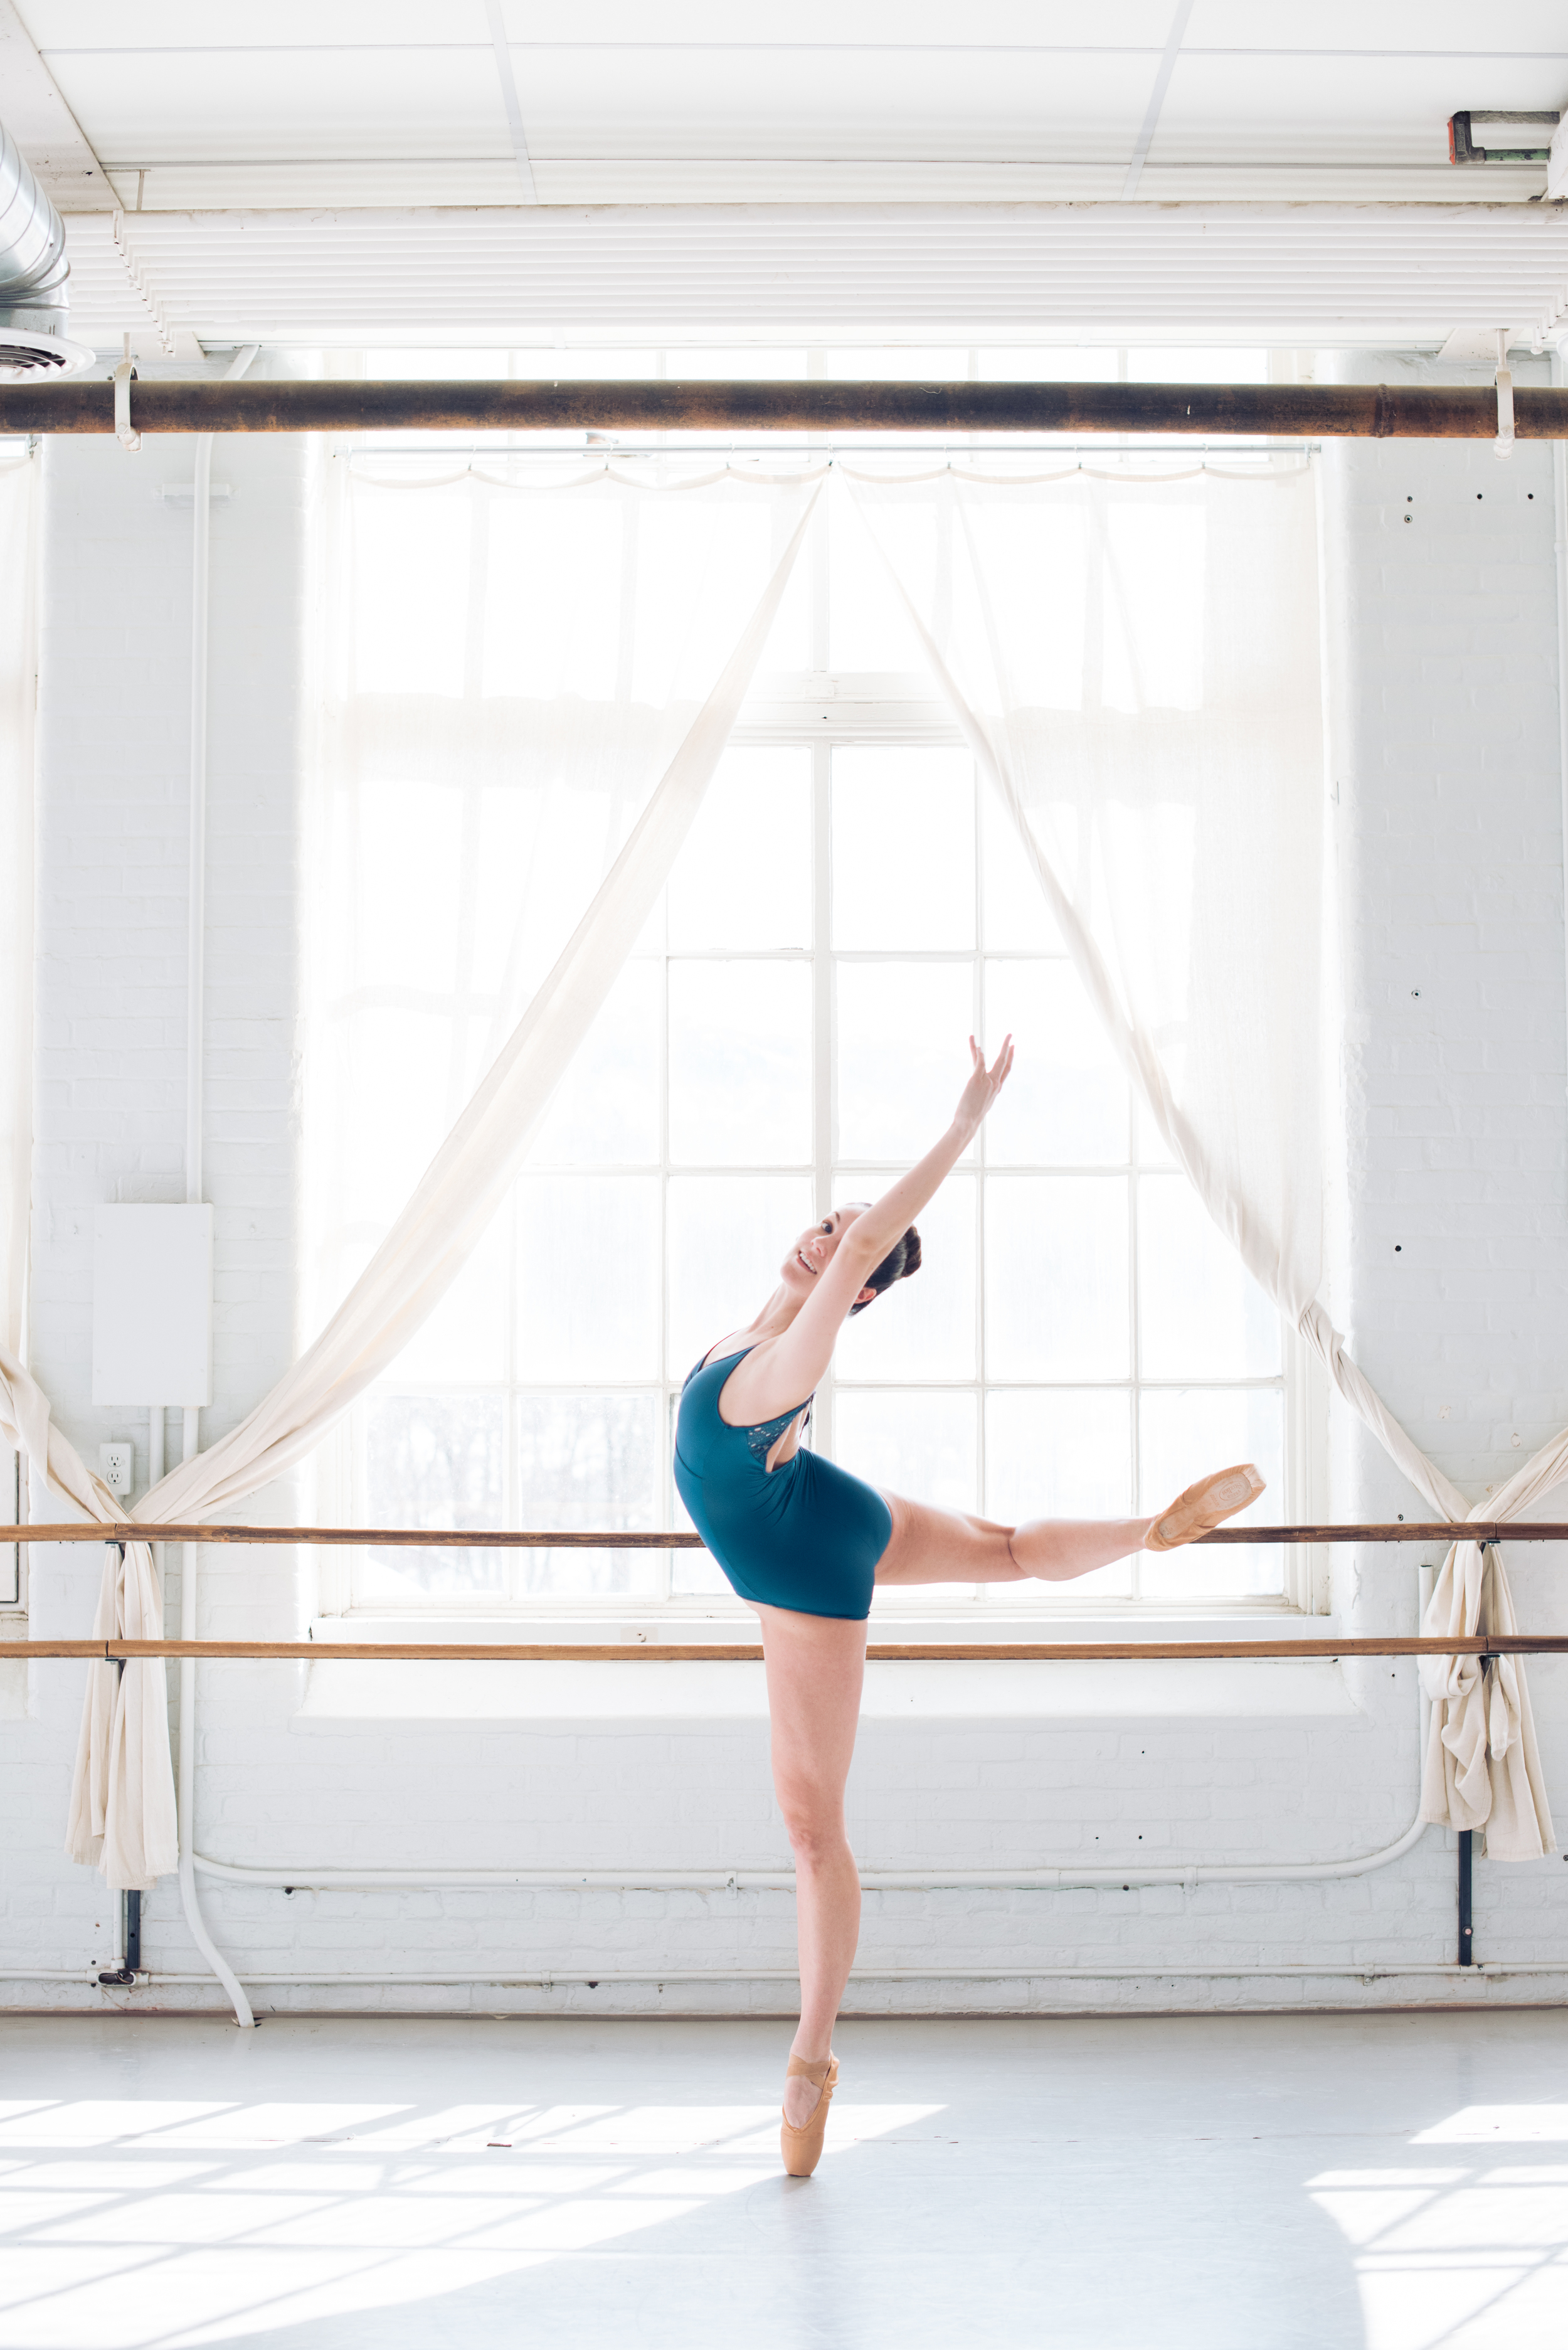 Ballet Photographer in Amherst Ma